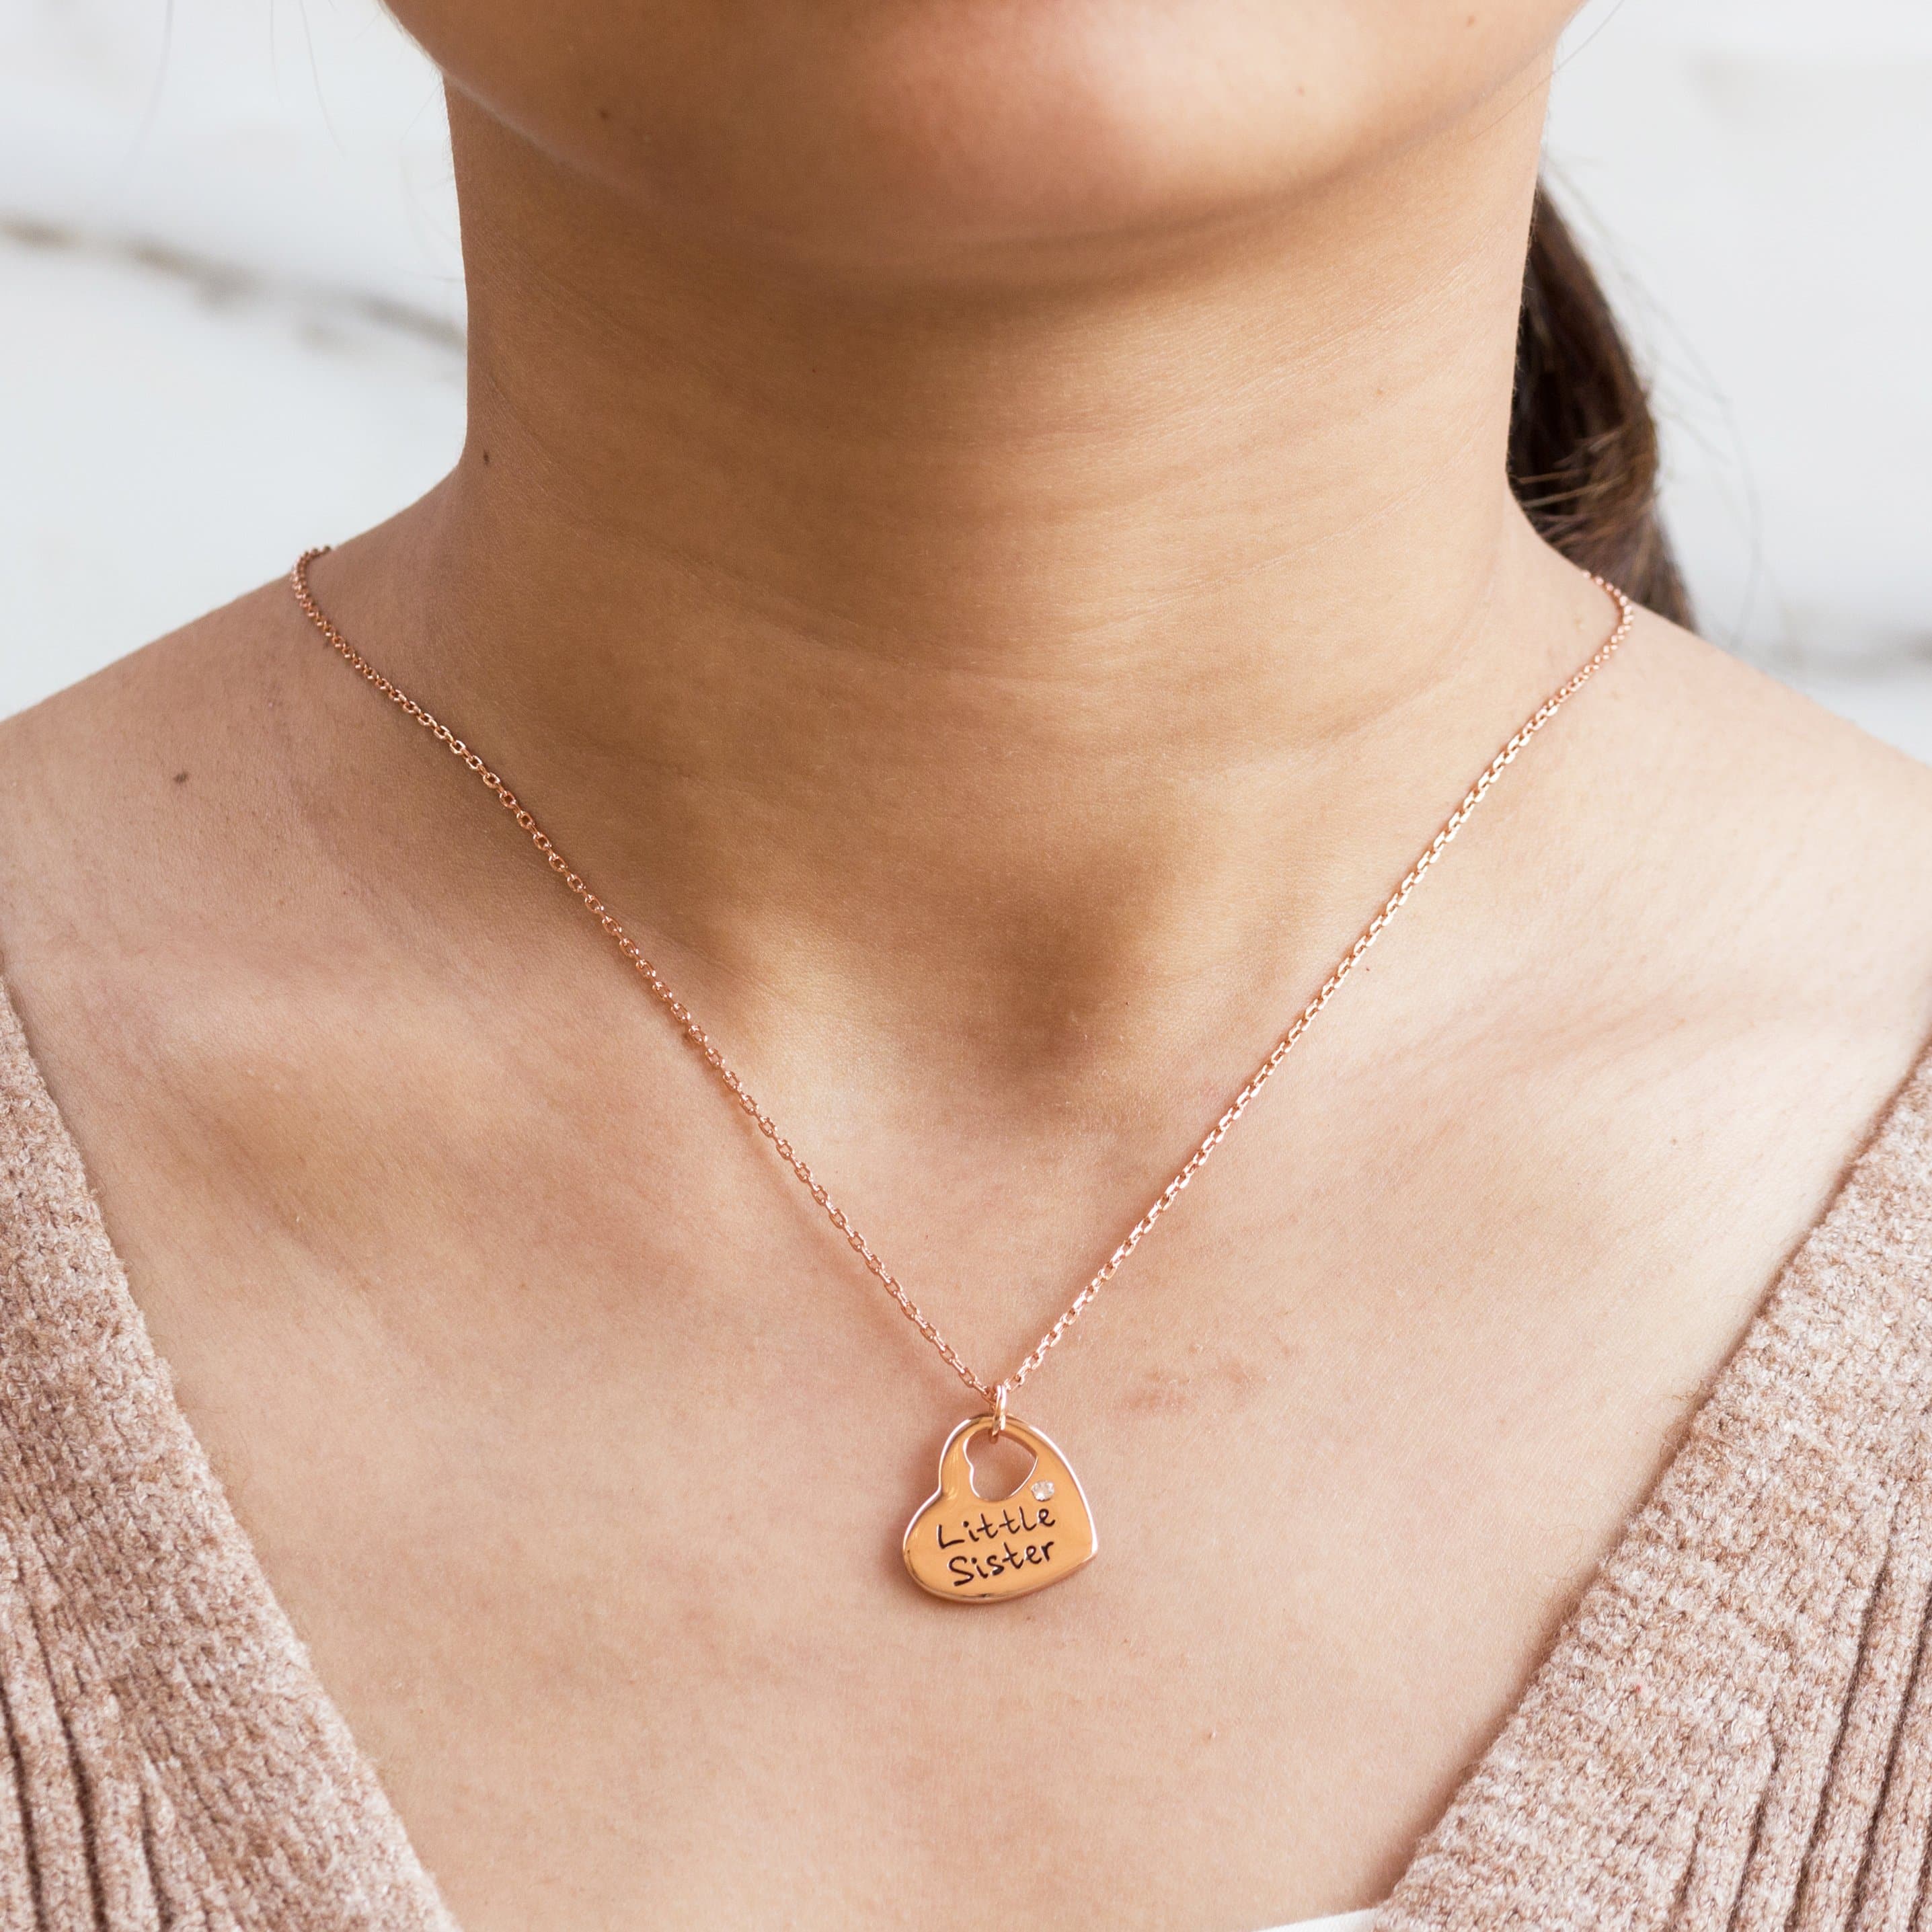 Rose Gold Plated Little Sister Heart Necklace Created with Zircondia® Crystals